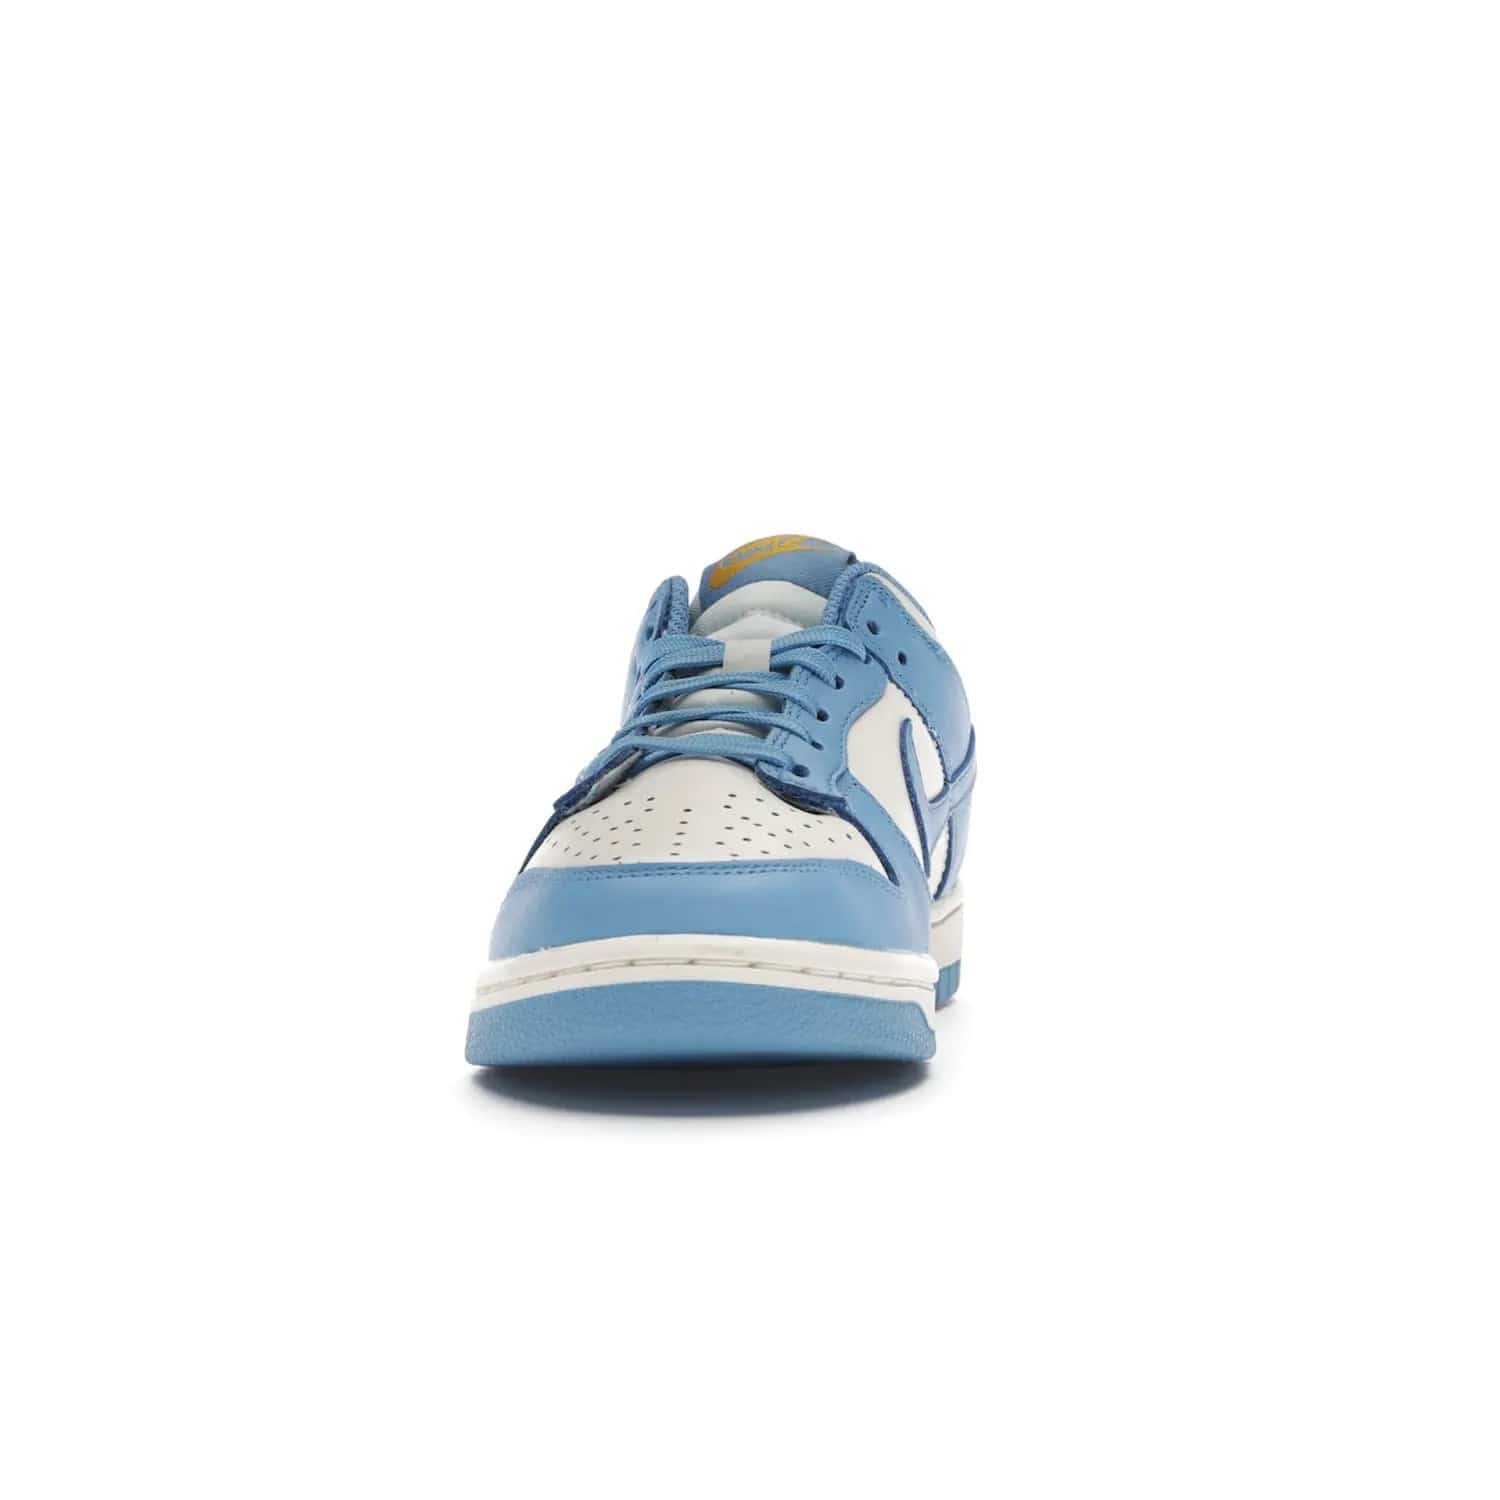 Nike Dunk Low Coast (Women's) - Image 11 - Only at www.BallersClubKickz.com - Iconic UCLA colors honor the west coast with the Nike Dunk Low Coast (Women's), a bold combo of light blue, white and yellow. Light leather upper with white midsole and light EVA outsole offer a modern twist. Released Feb 2021 for $100.